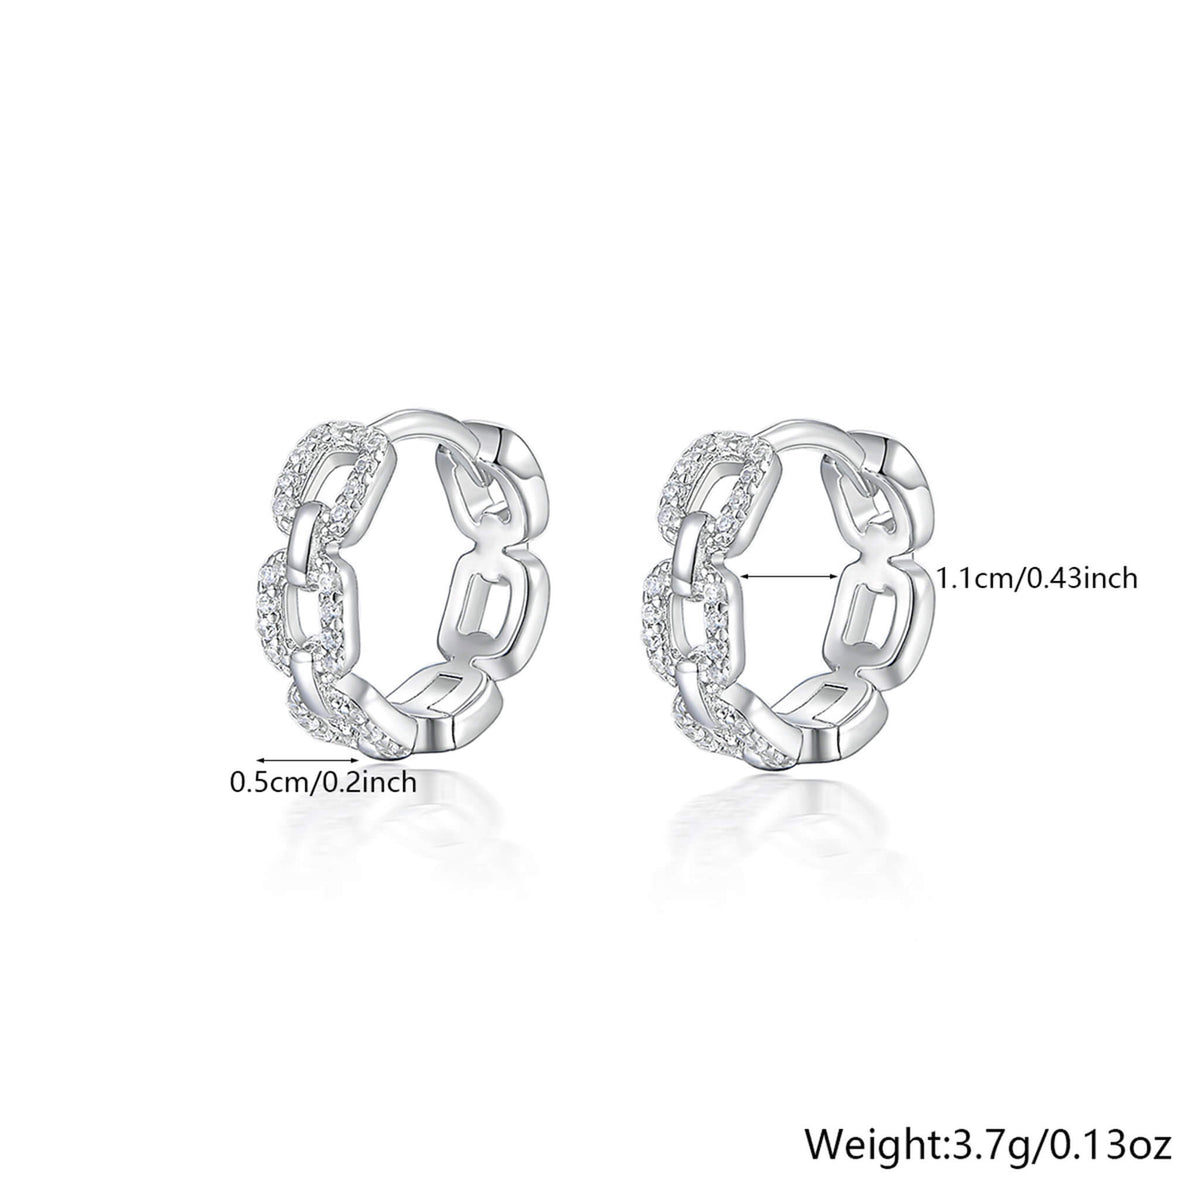 925 Silver Hollow Circle Earrings with Waterdrop Zircon Inlay - Versatile Halloween Accessory  UponBasics A Silver 